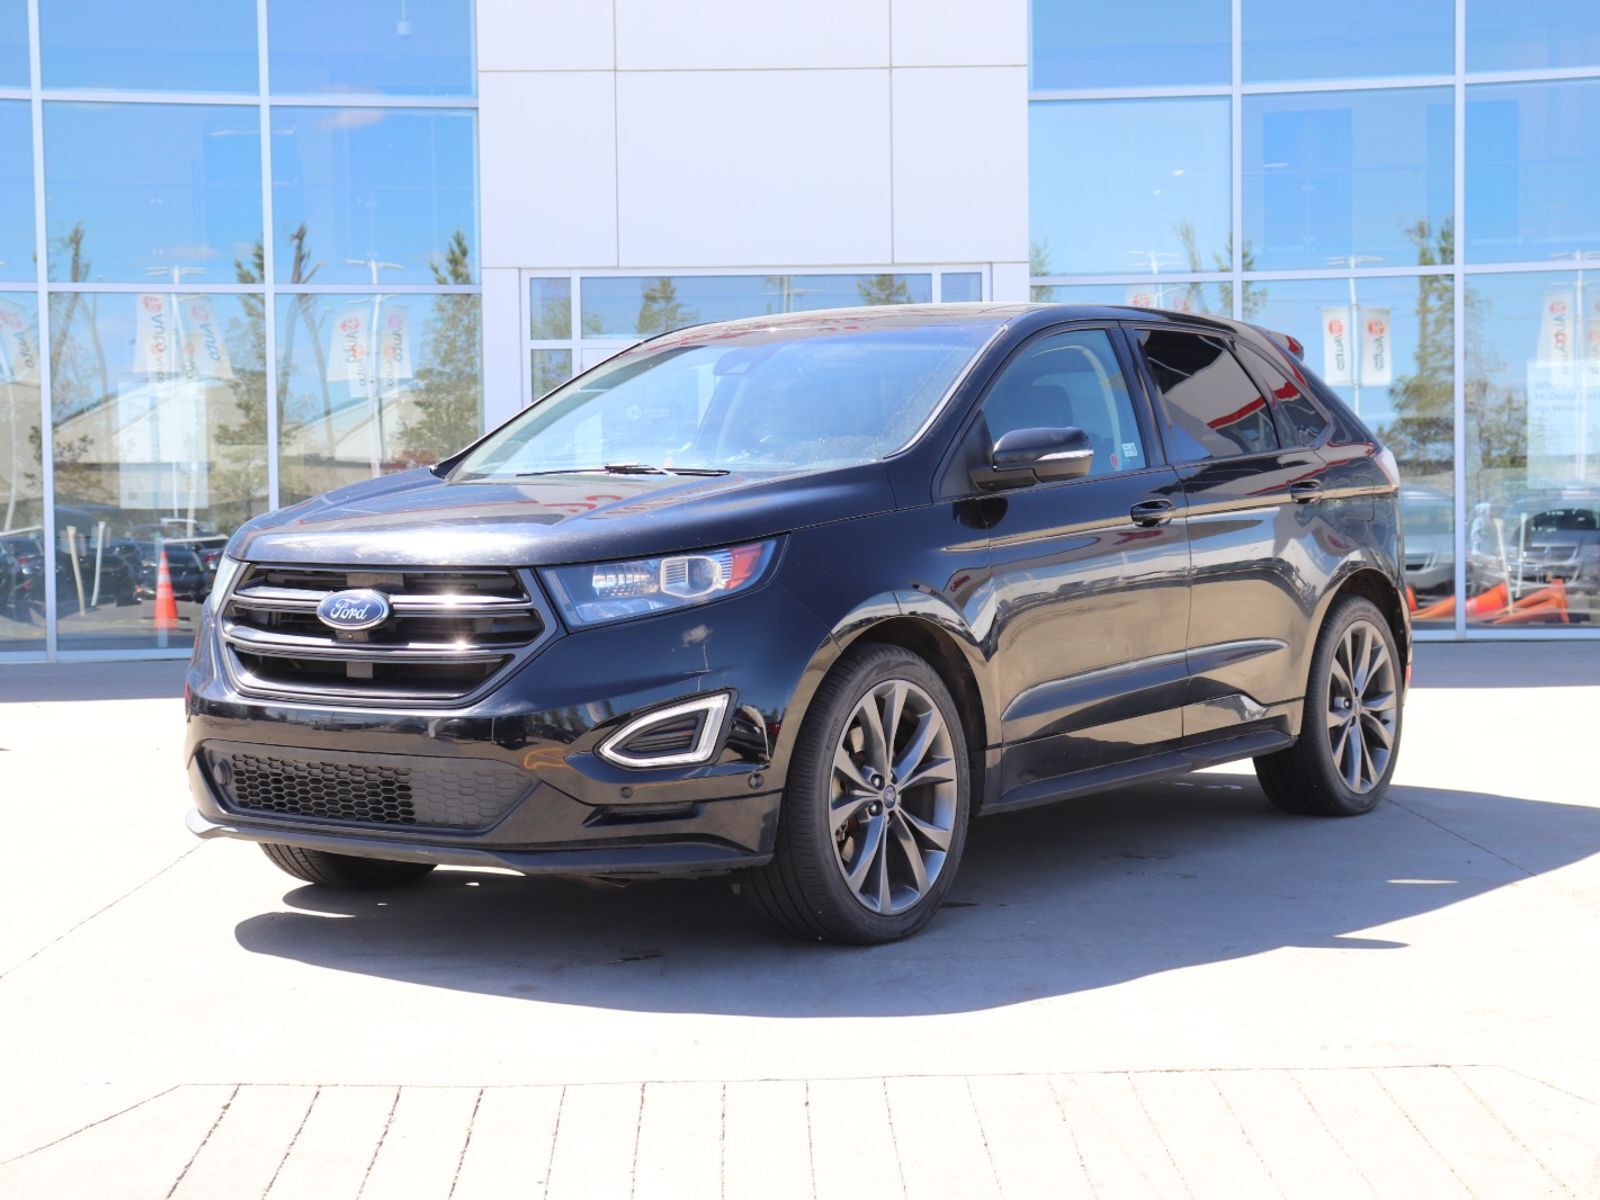 2017 Ford Edge SPORT AWD HEATED SEATS/BACK UP CAMERA/HANDS FREE L